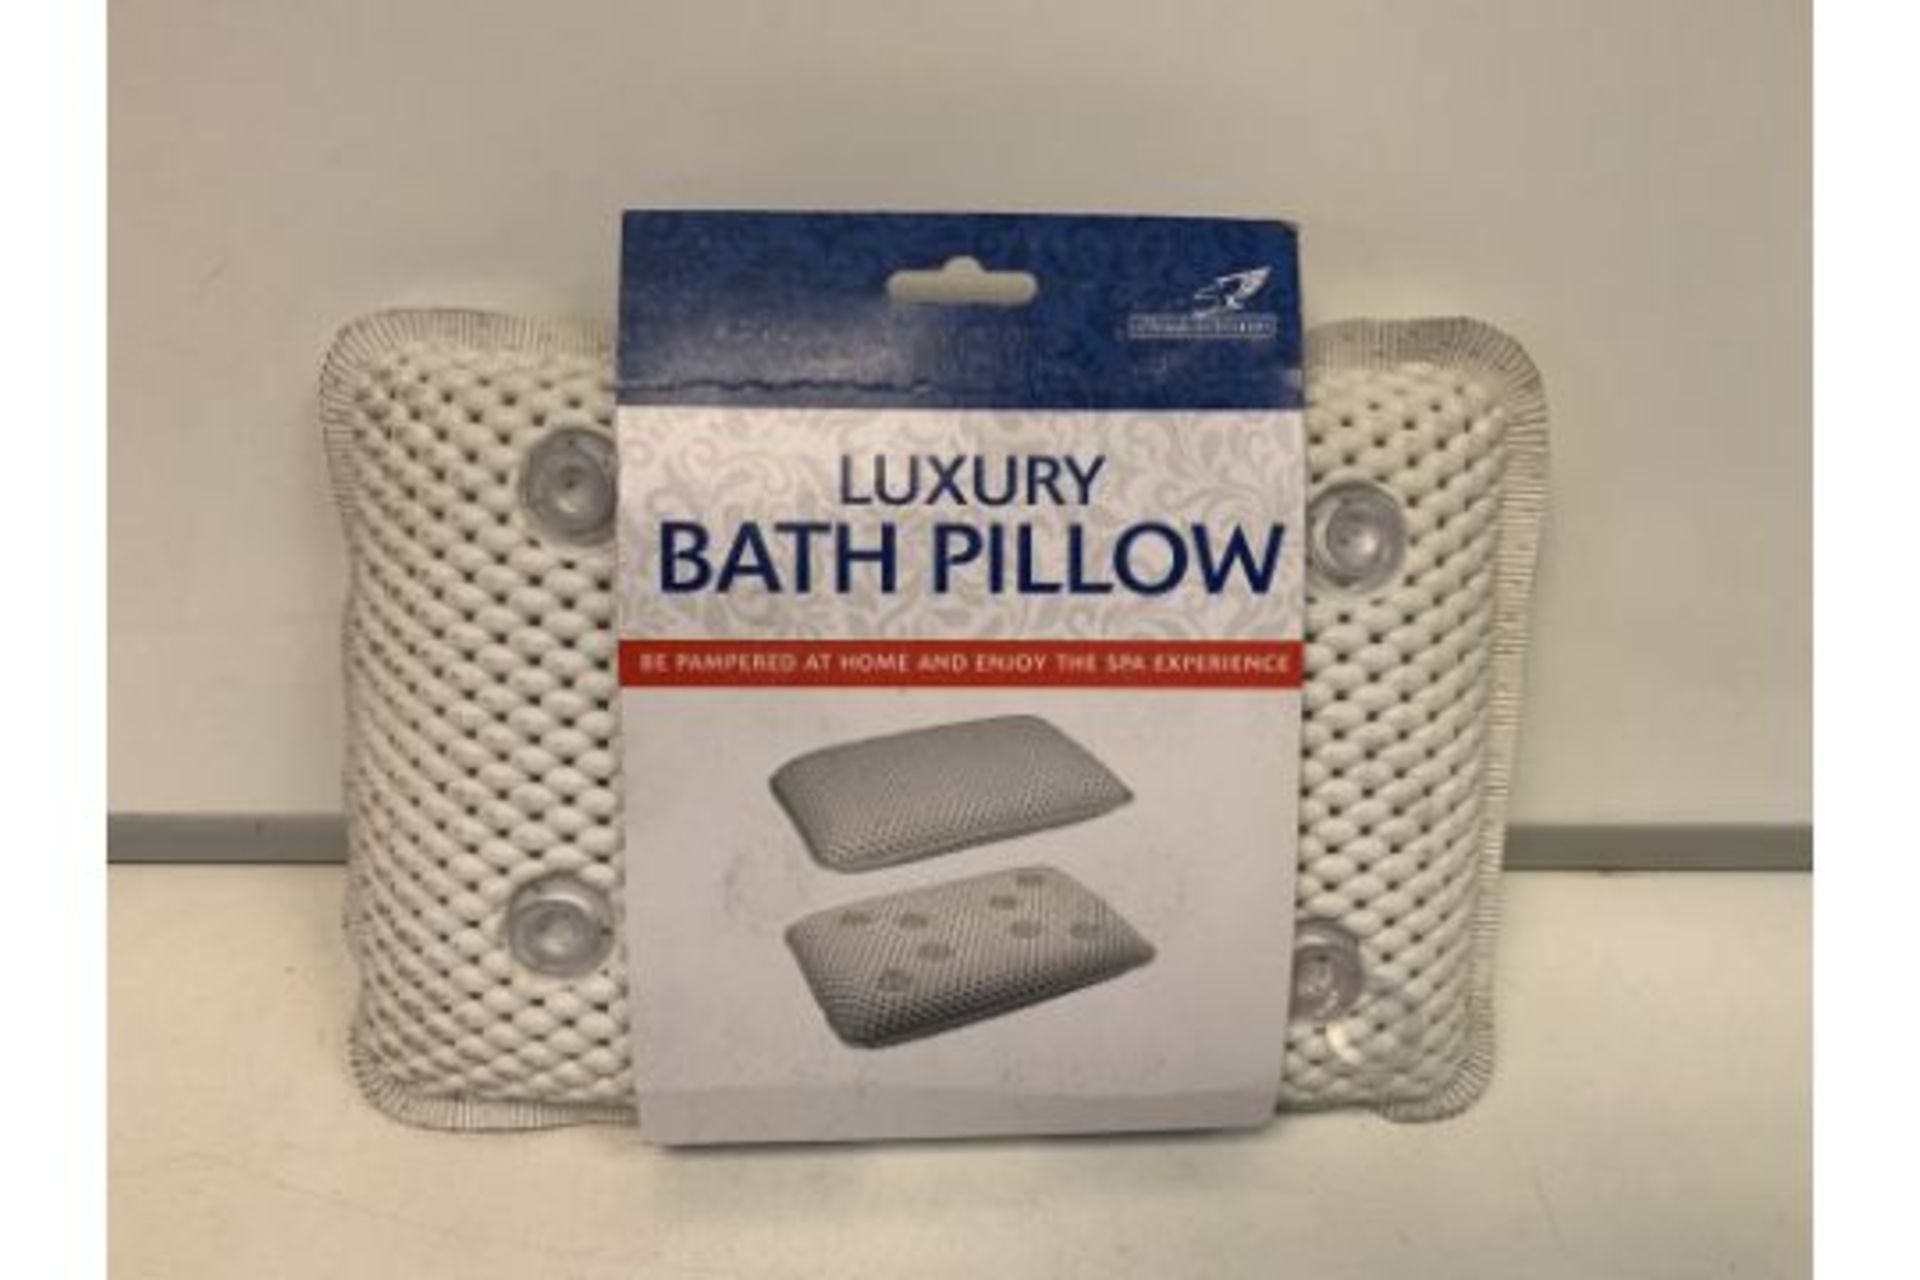 24 X NEW PACKAGED FALCON LUXURY BATH PILLOWS - BE PAMPERED AT HOME & ENJOY THE SPA EXPERIENCE (